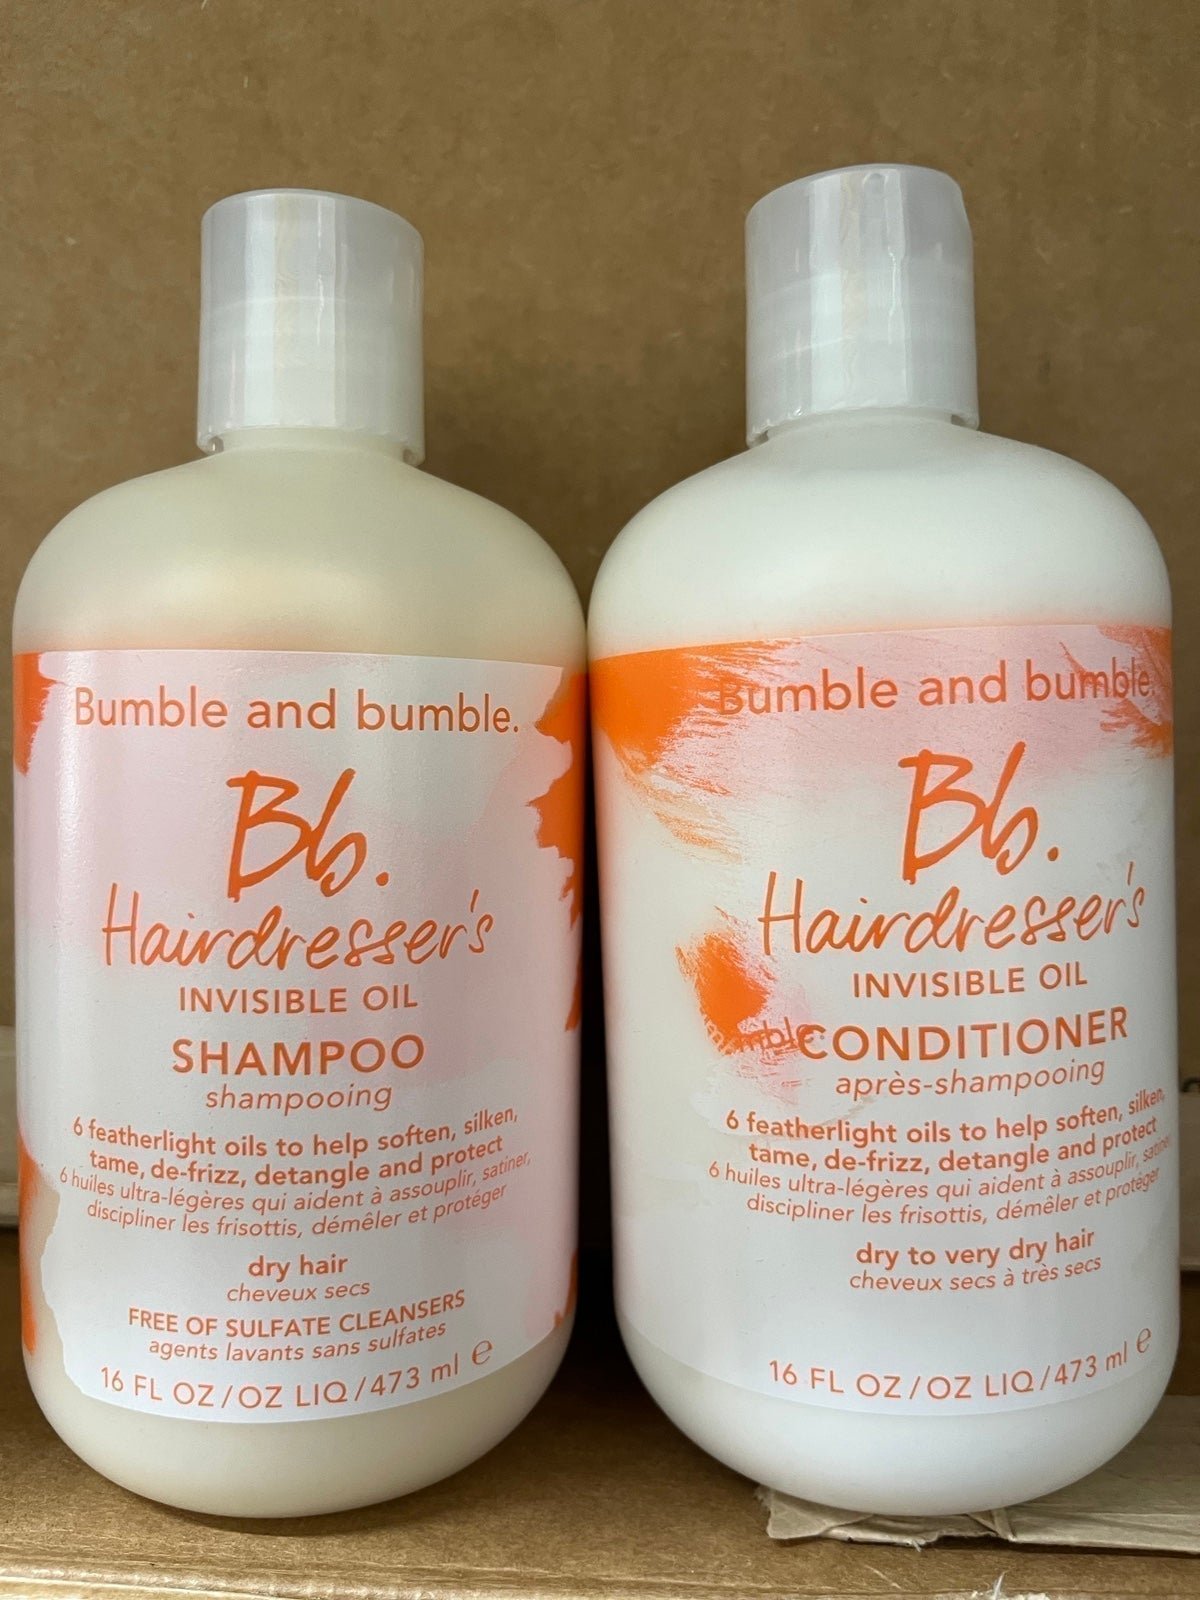 Bumble & Bumble Hair dresser’s Invisible Oil shampoo & Conditioner 16 oz Ab2eArXTT